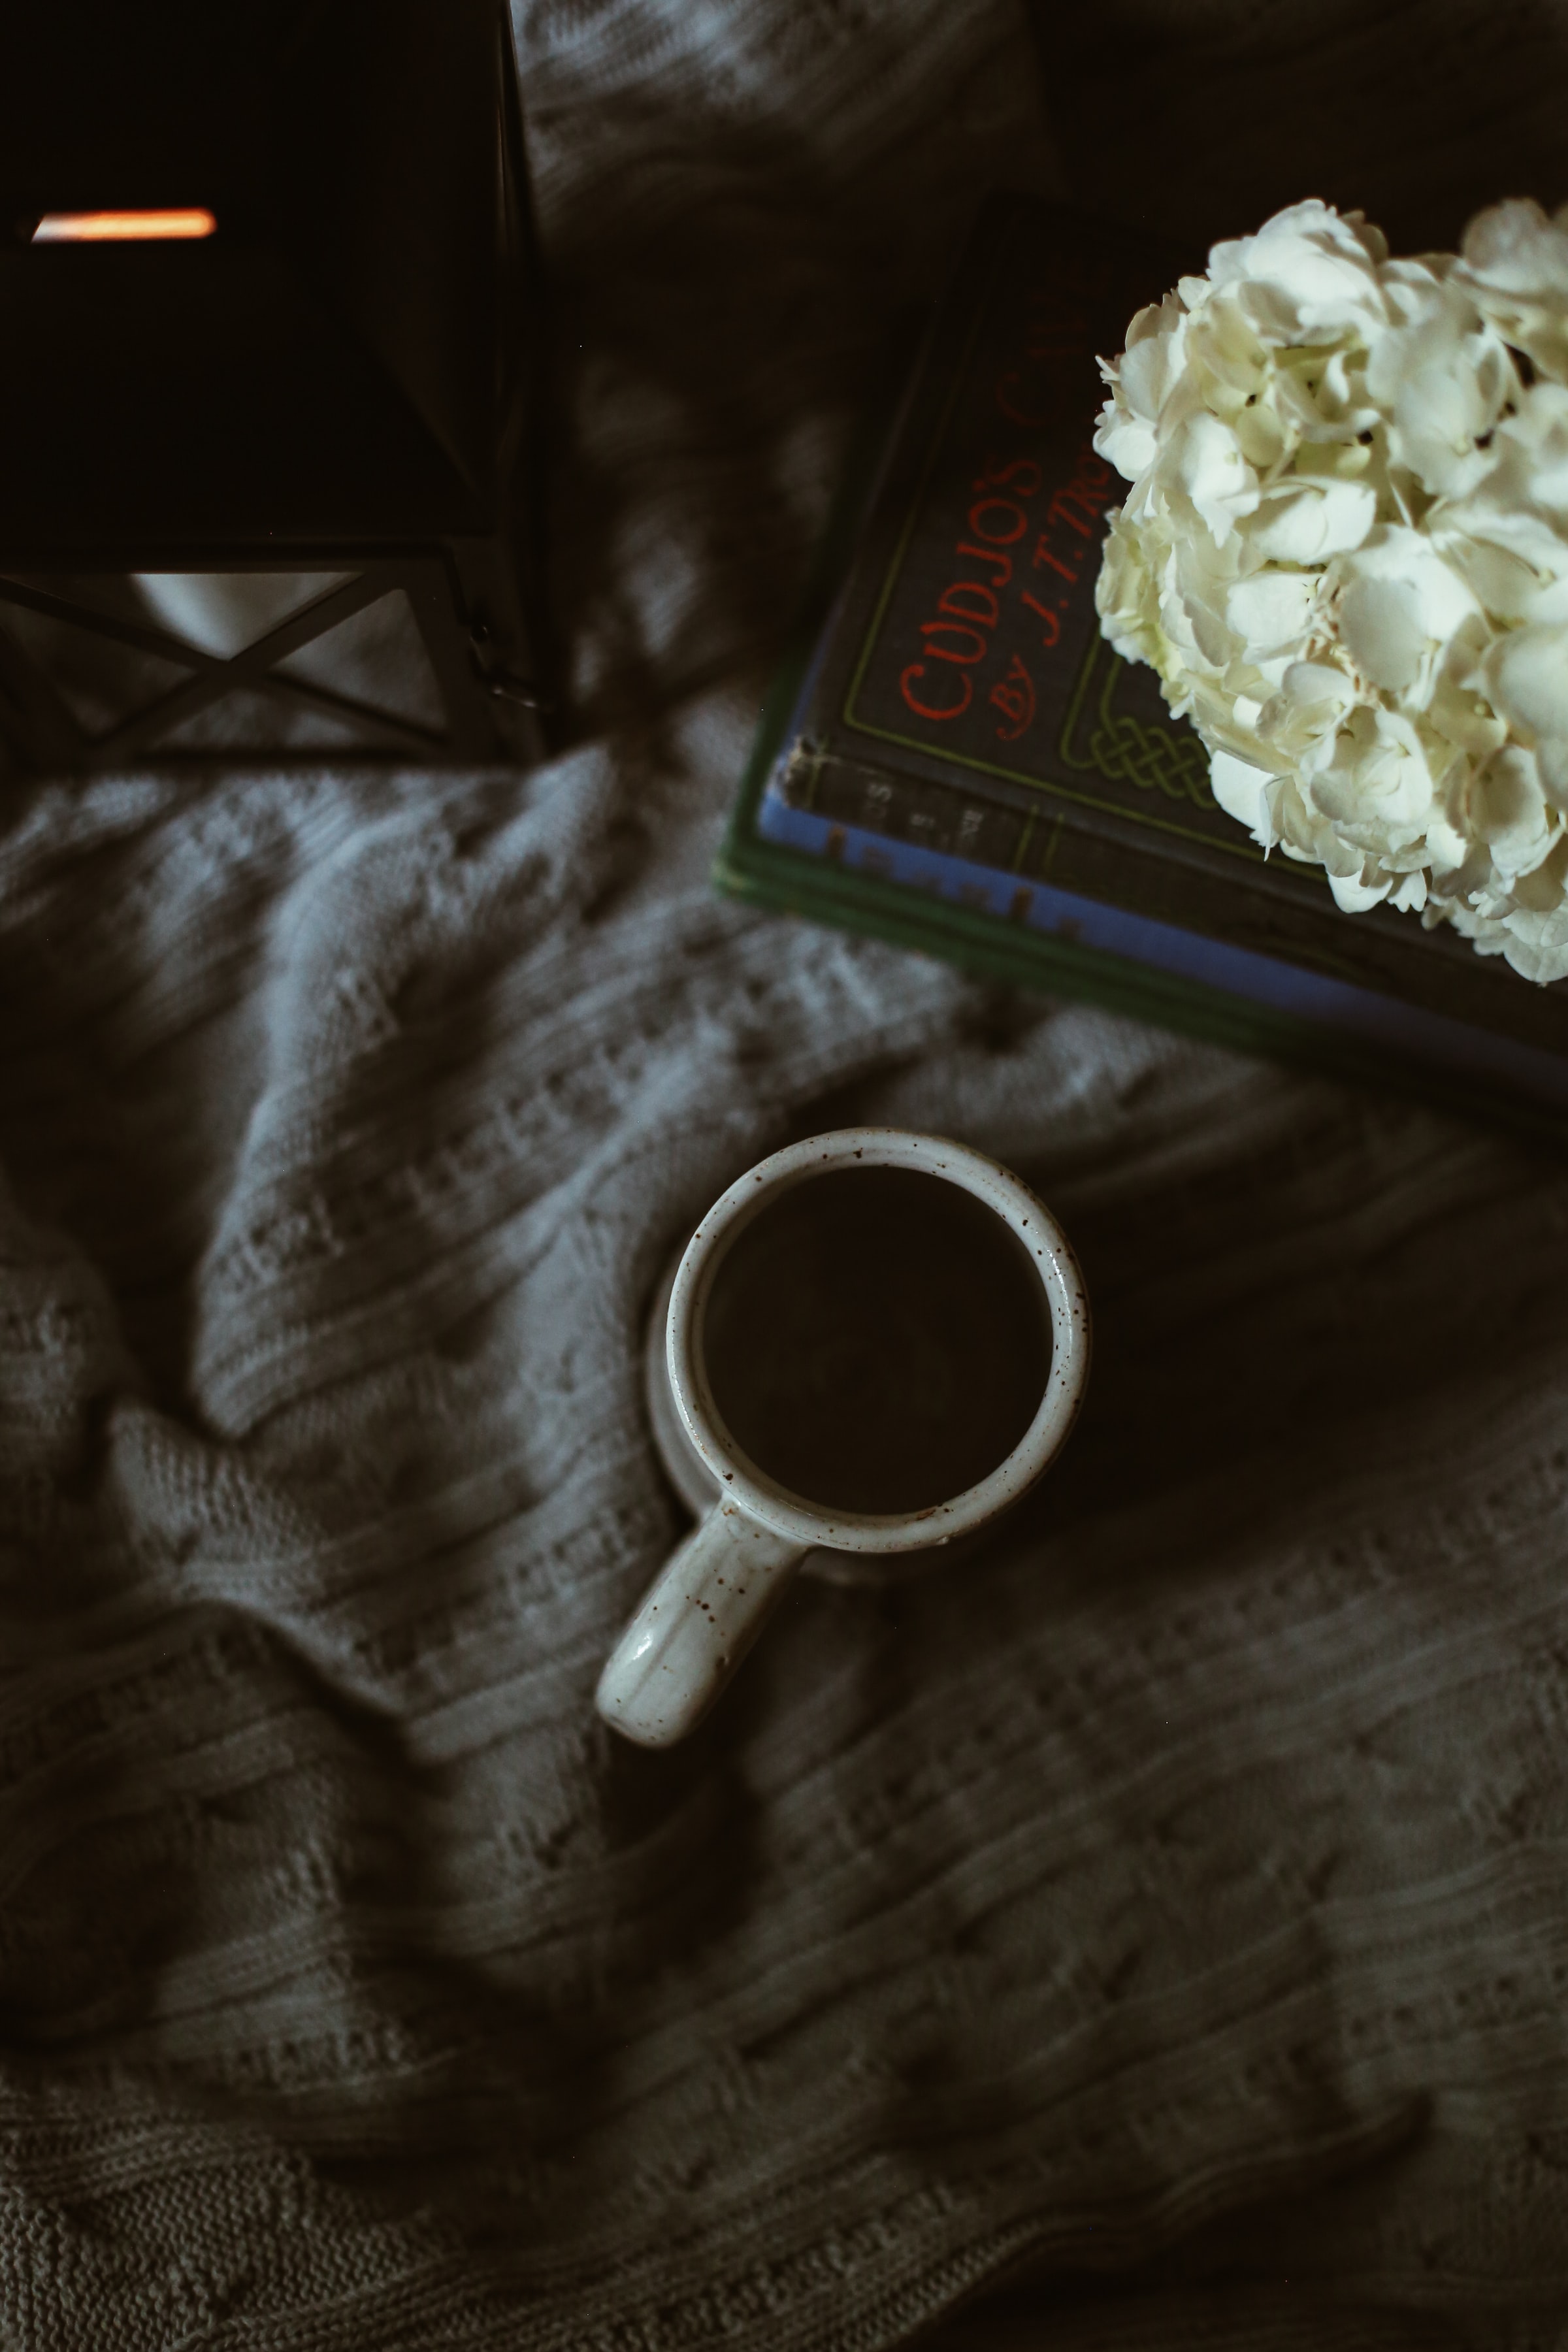 flowers, coffee, miscellanea, miscellaneous, cup, cloth, book Image for desktop